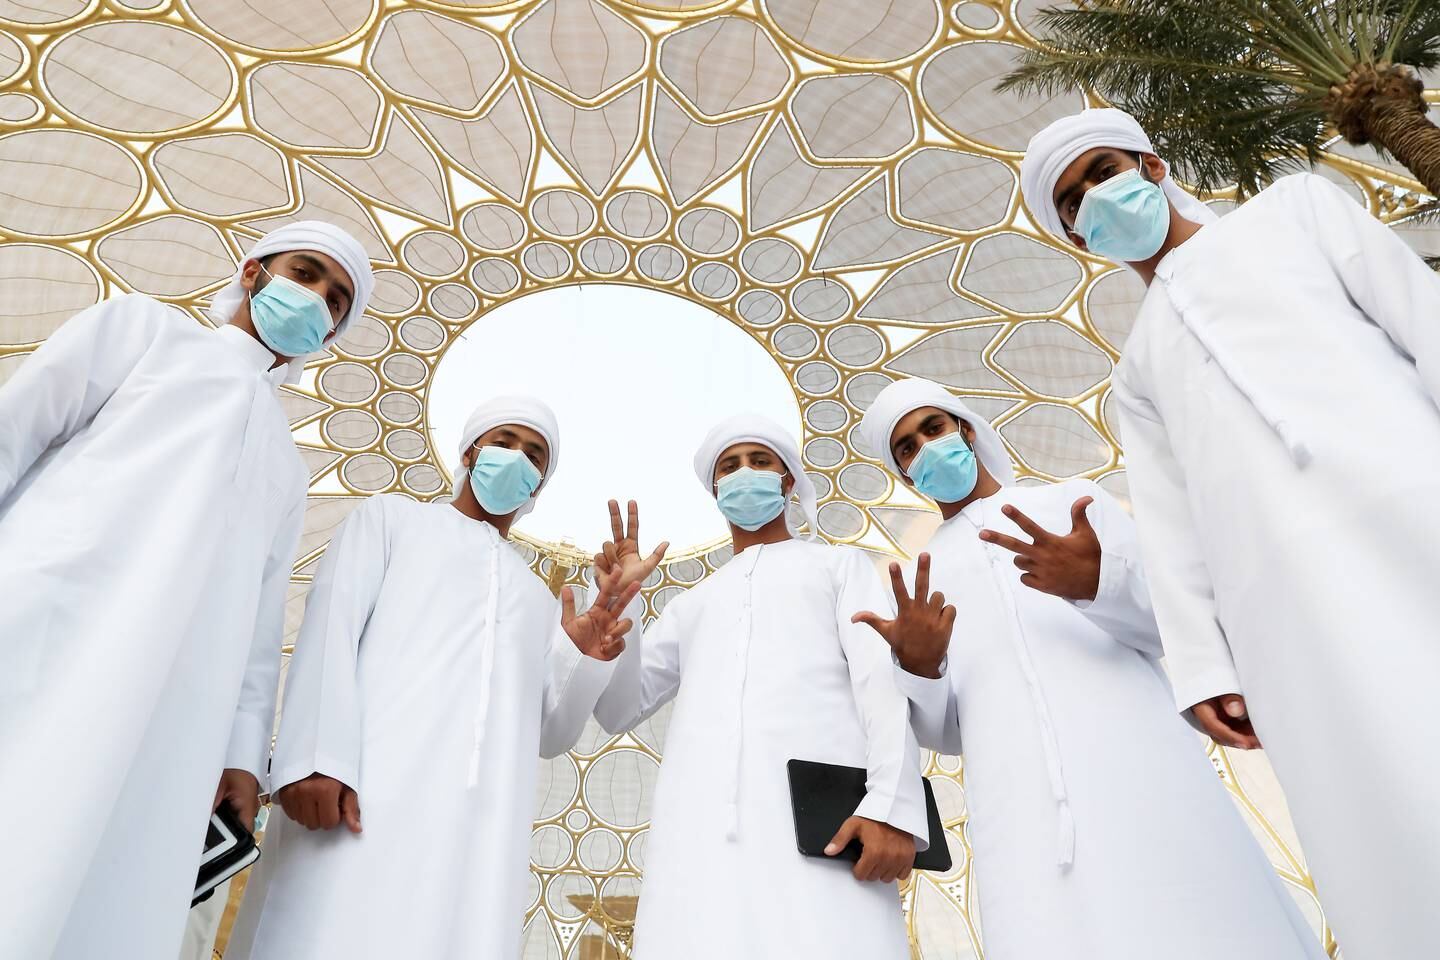 Students from Abu Dhabi Police Academy visit Al Wasl Plaza at the Expo 2020 site in Dubai, on October 12, 2021. Pawan Singh / The National